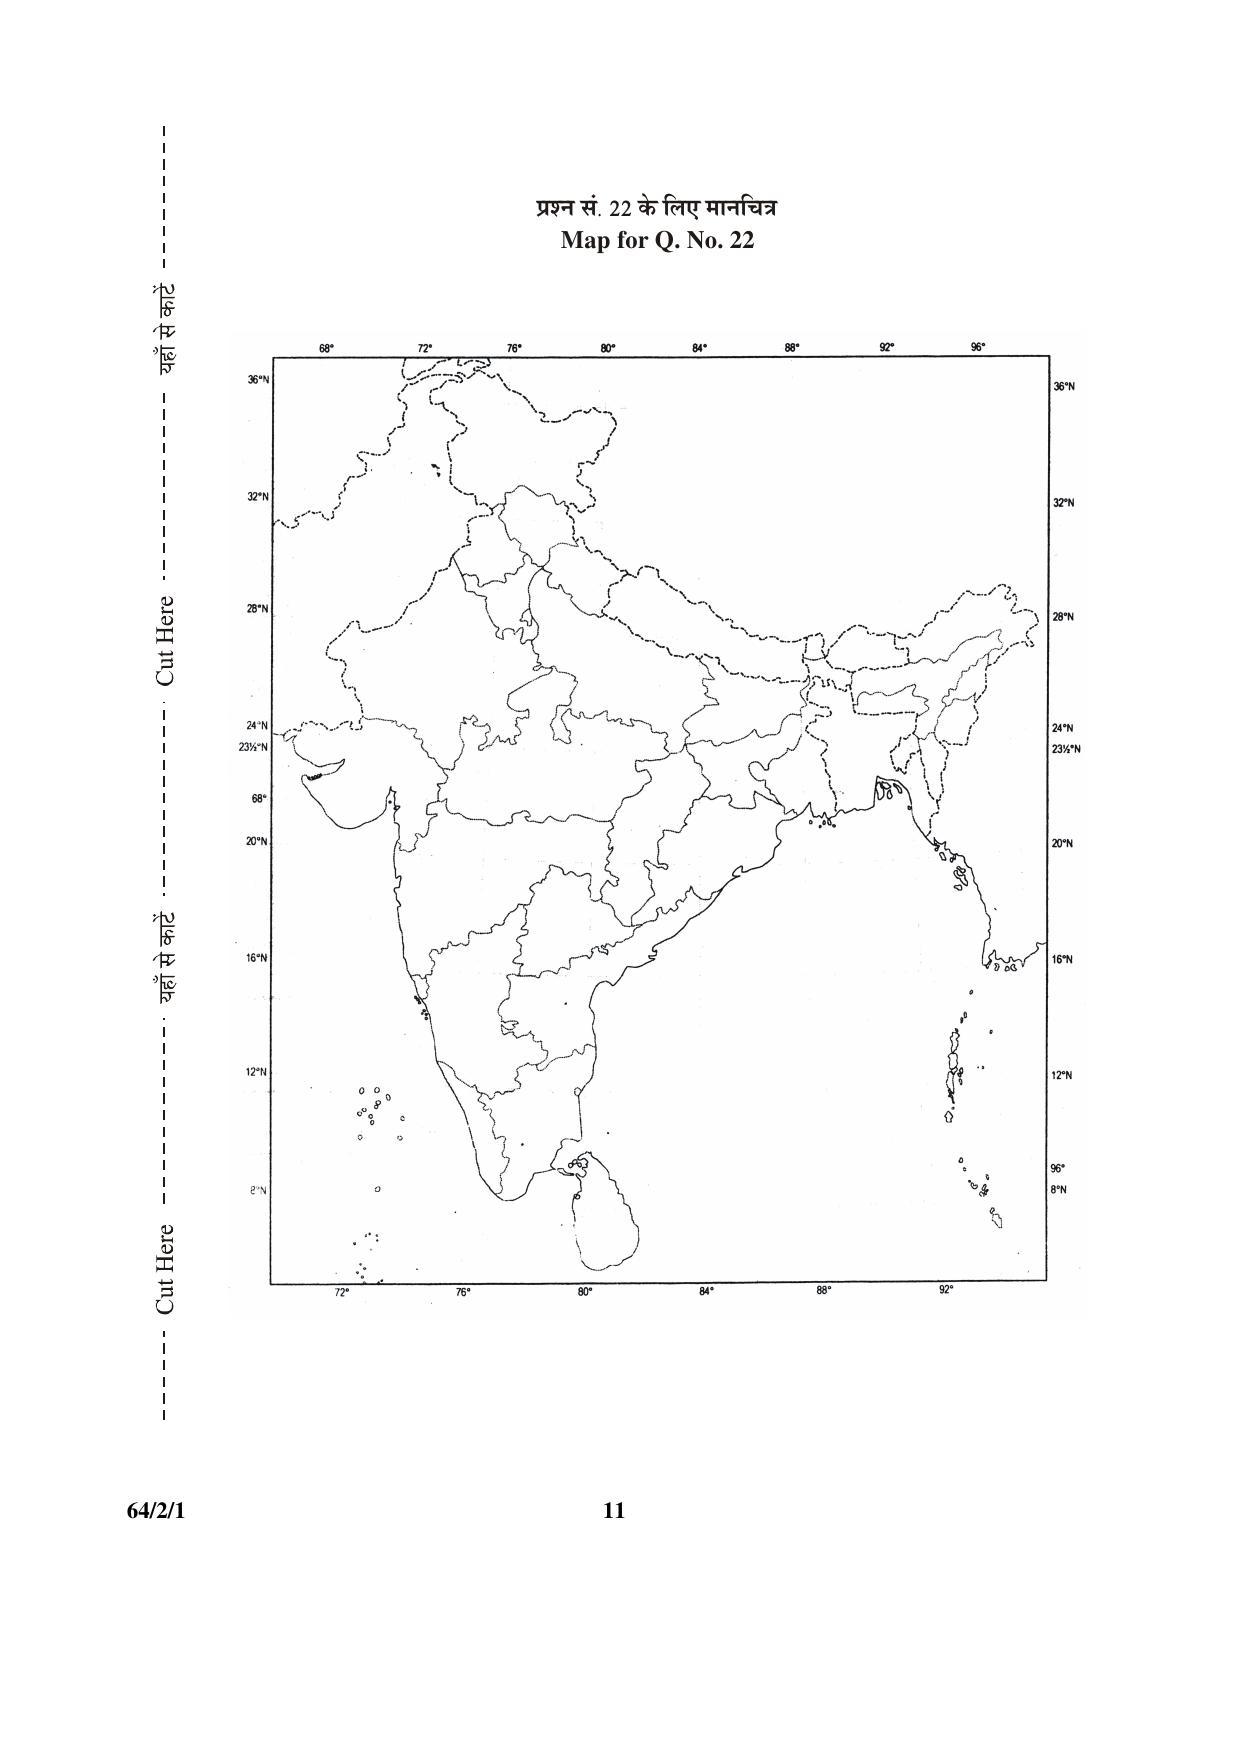 CBSE Class 12 64-2-1 Geography 2016 Question Paper - Page 11